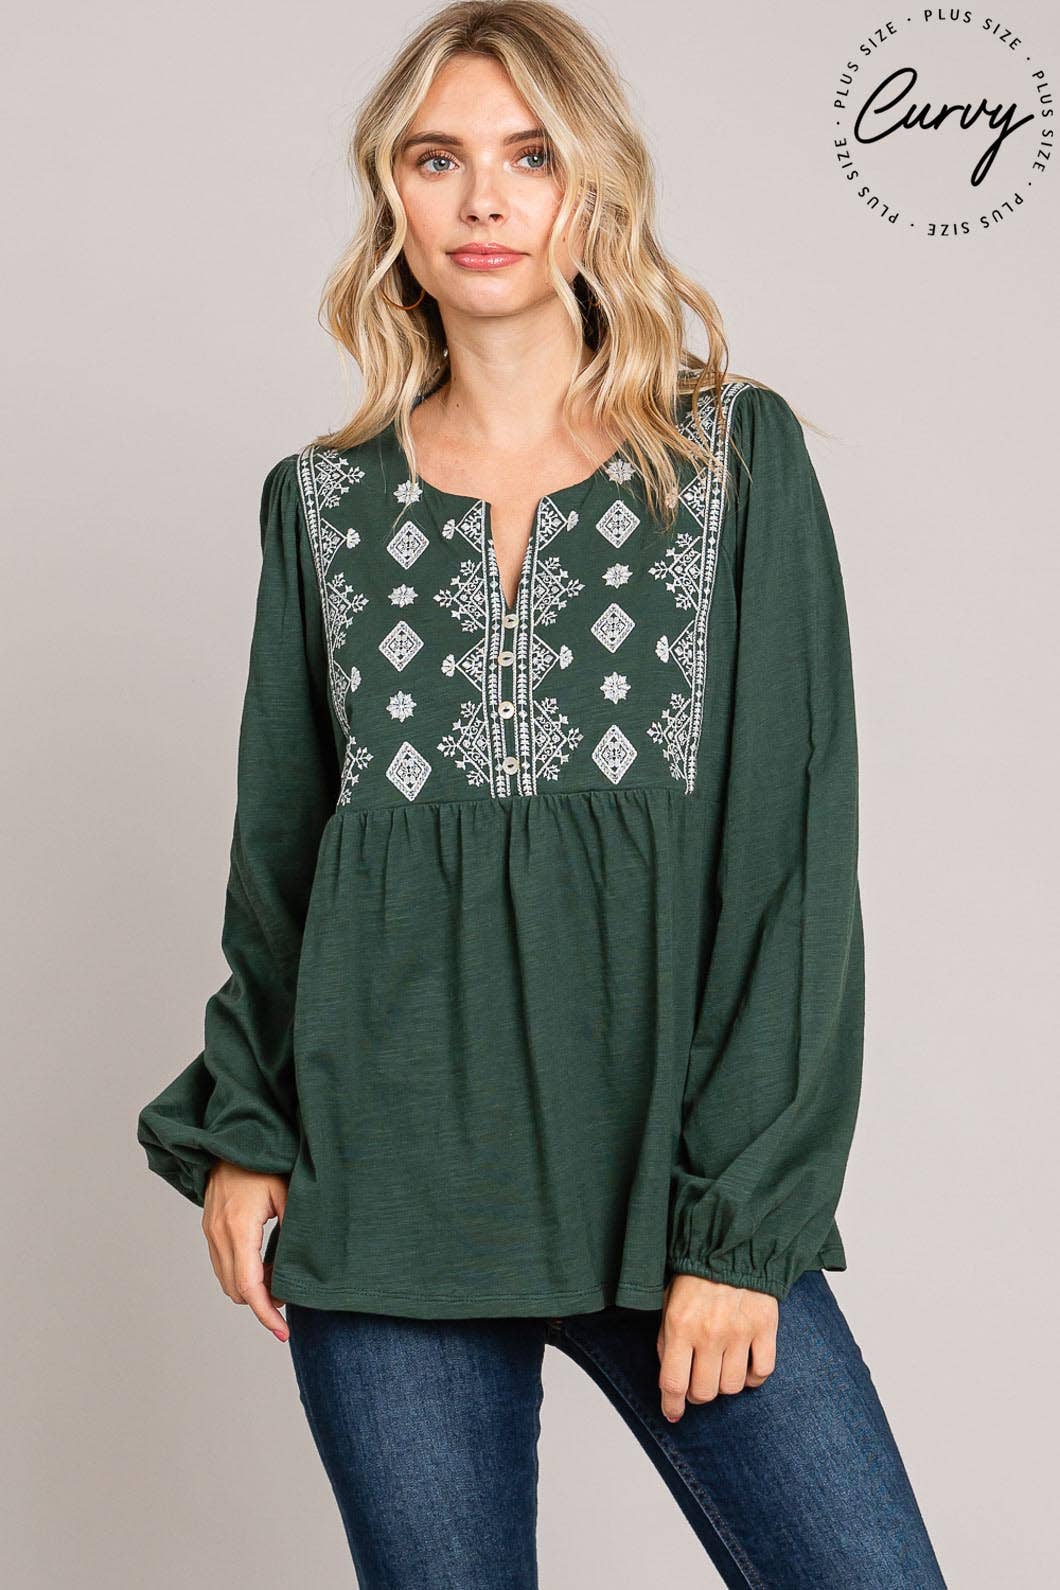 Hunter Green Embroidered Top